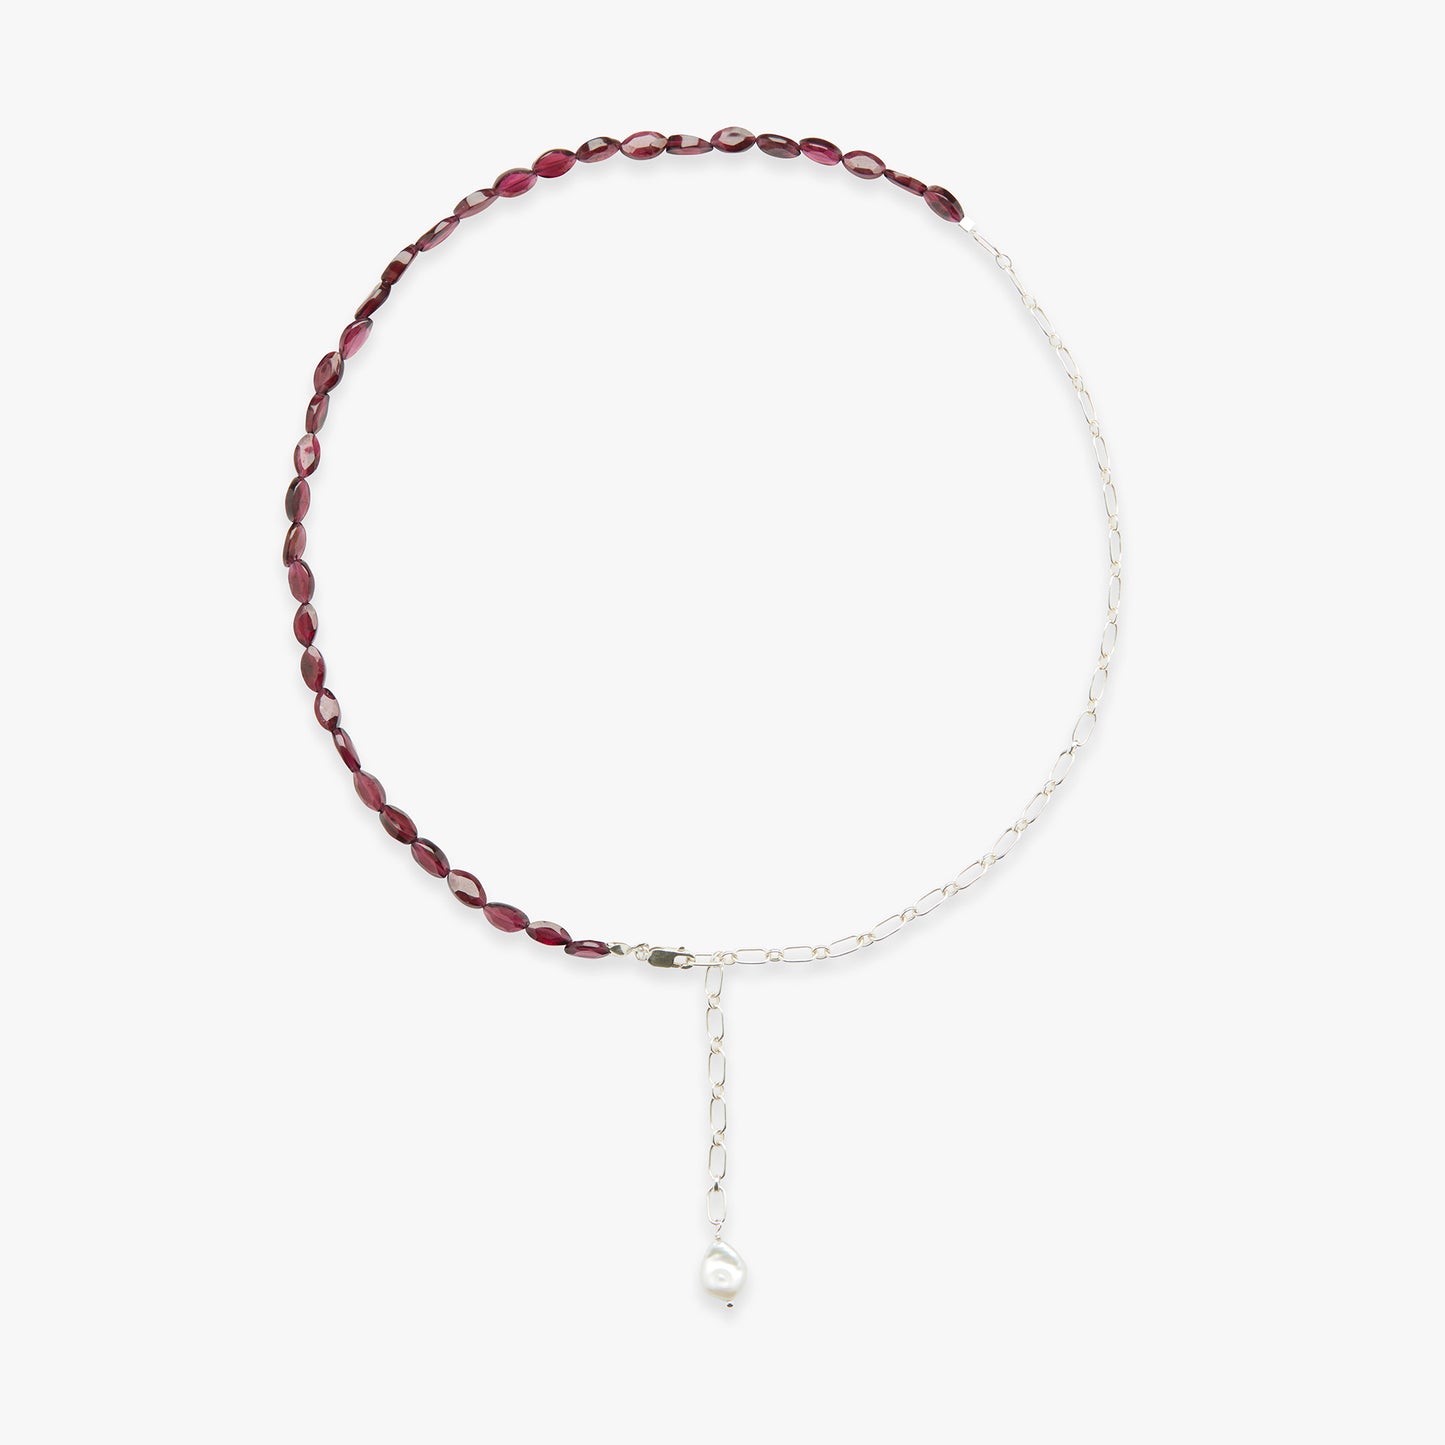 Pomegranate Seeds lariat necklace silver